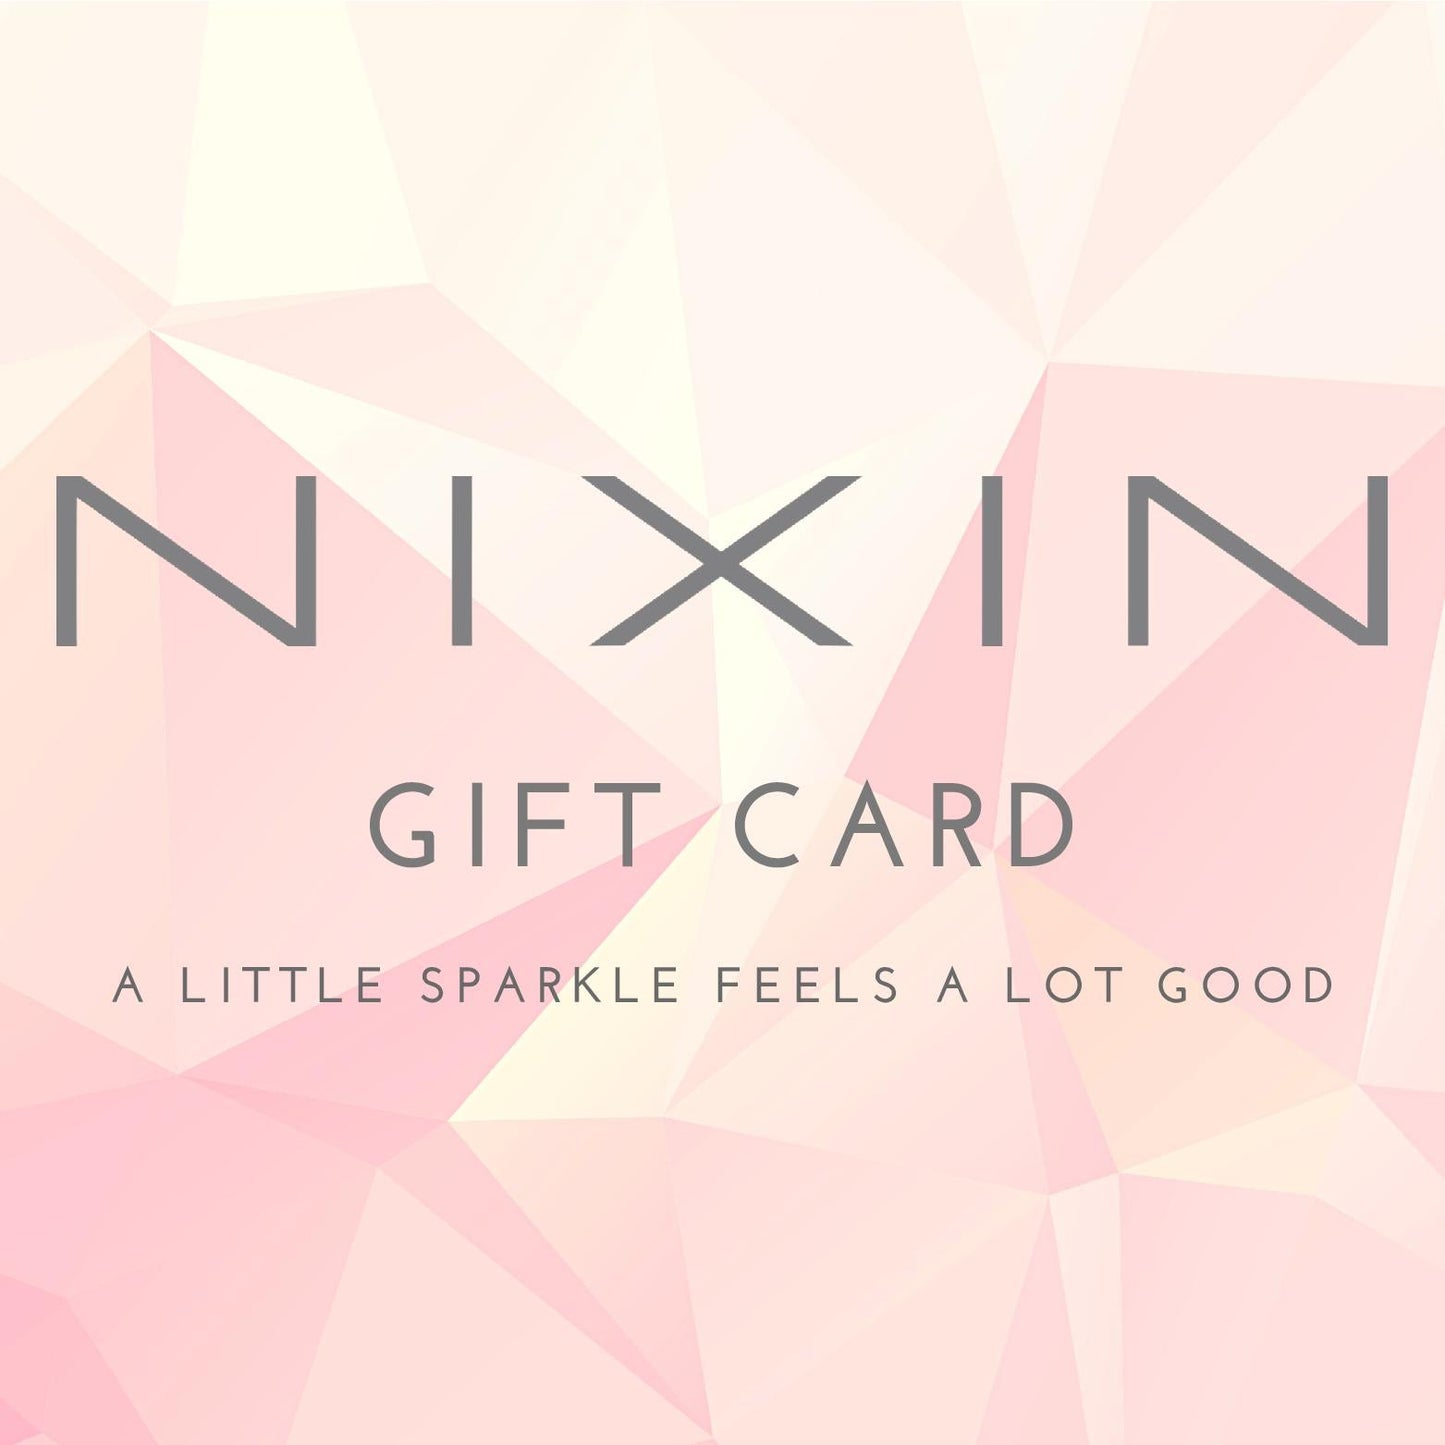 NIXIN Jewelry Gift Card with a color branded pale pink geometric graphic background and grey writing on top. Gift card is available in various denominations.